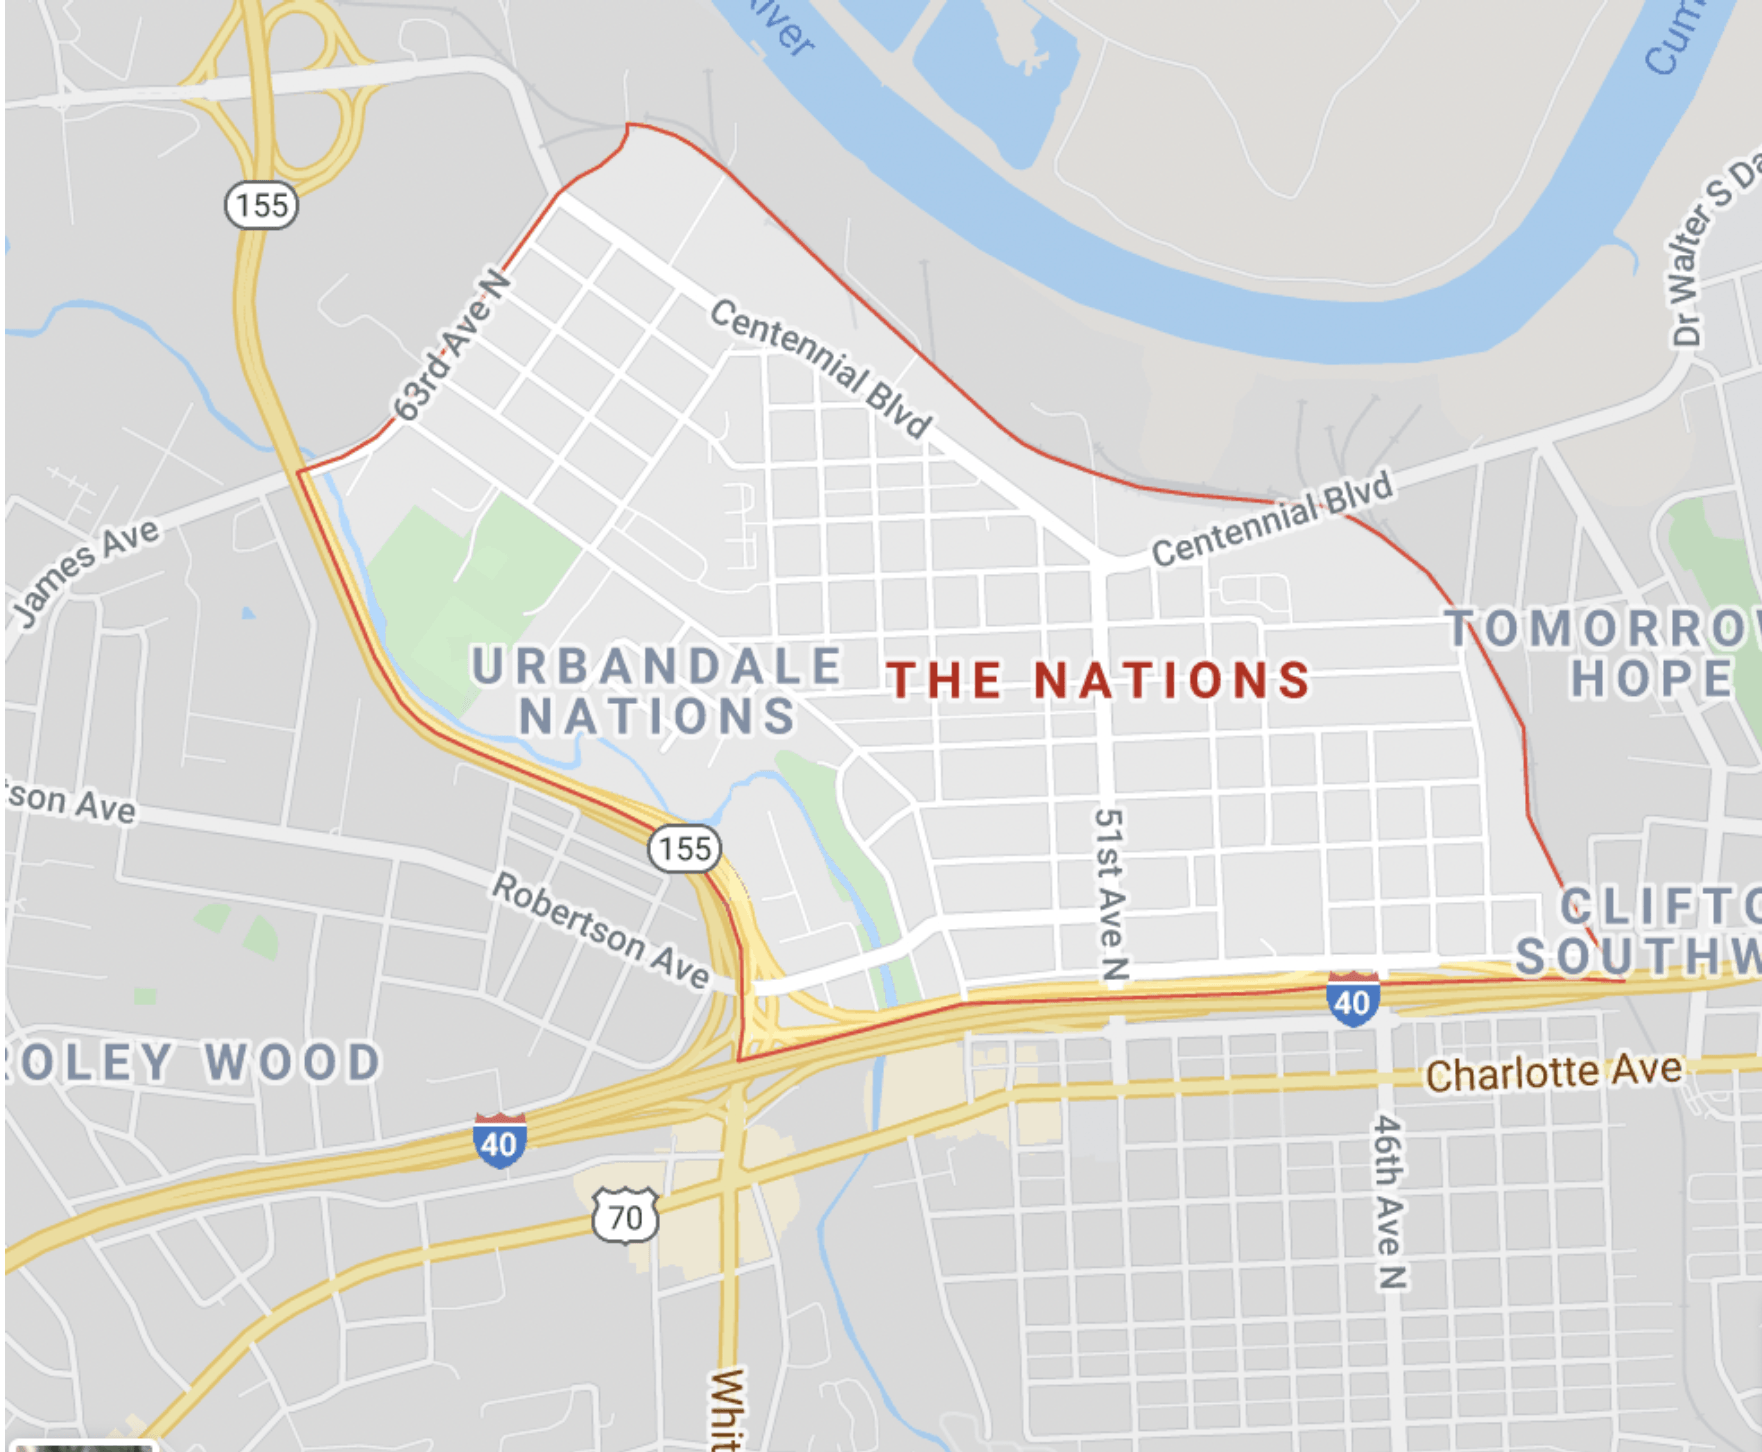 map of The Nations neighborhood, Nashville Tennessee